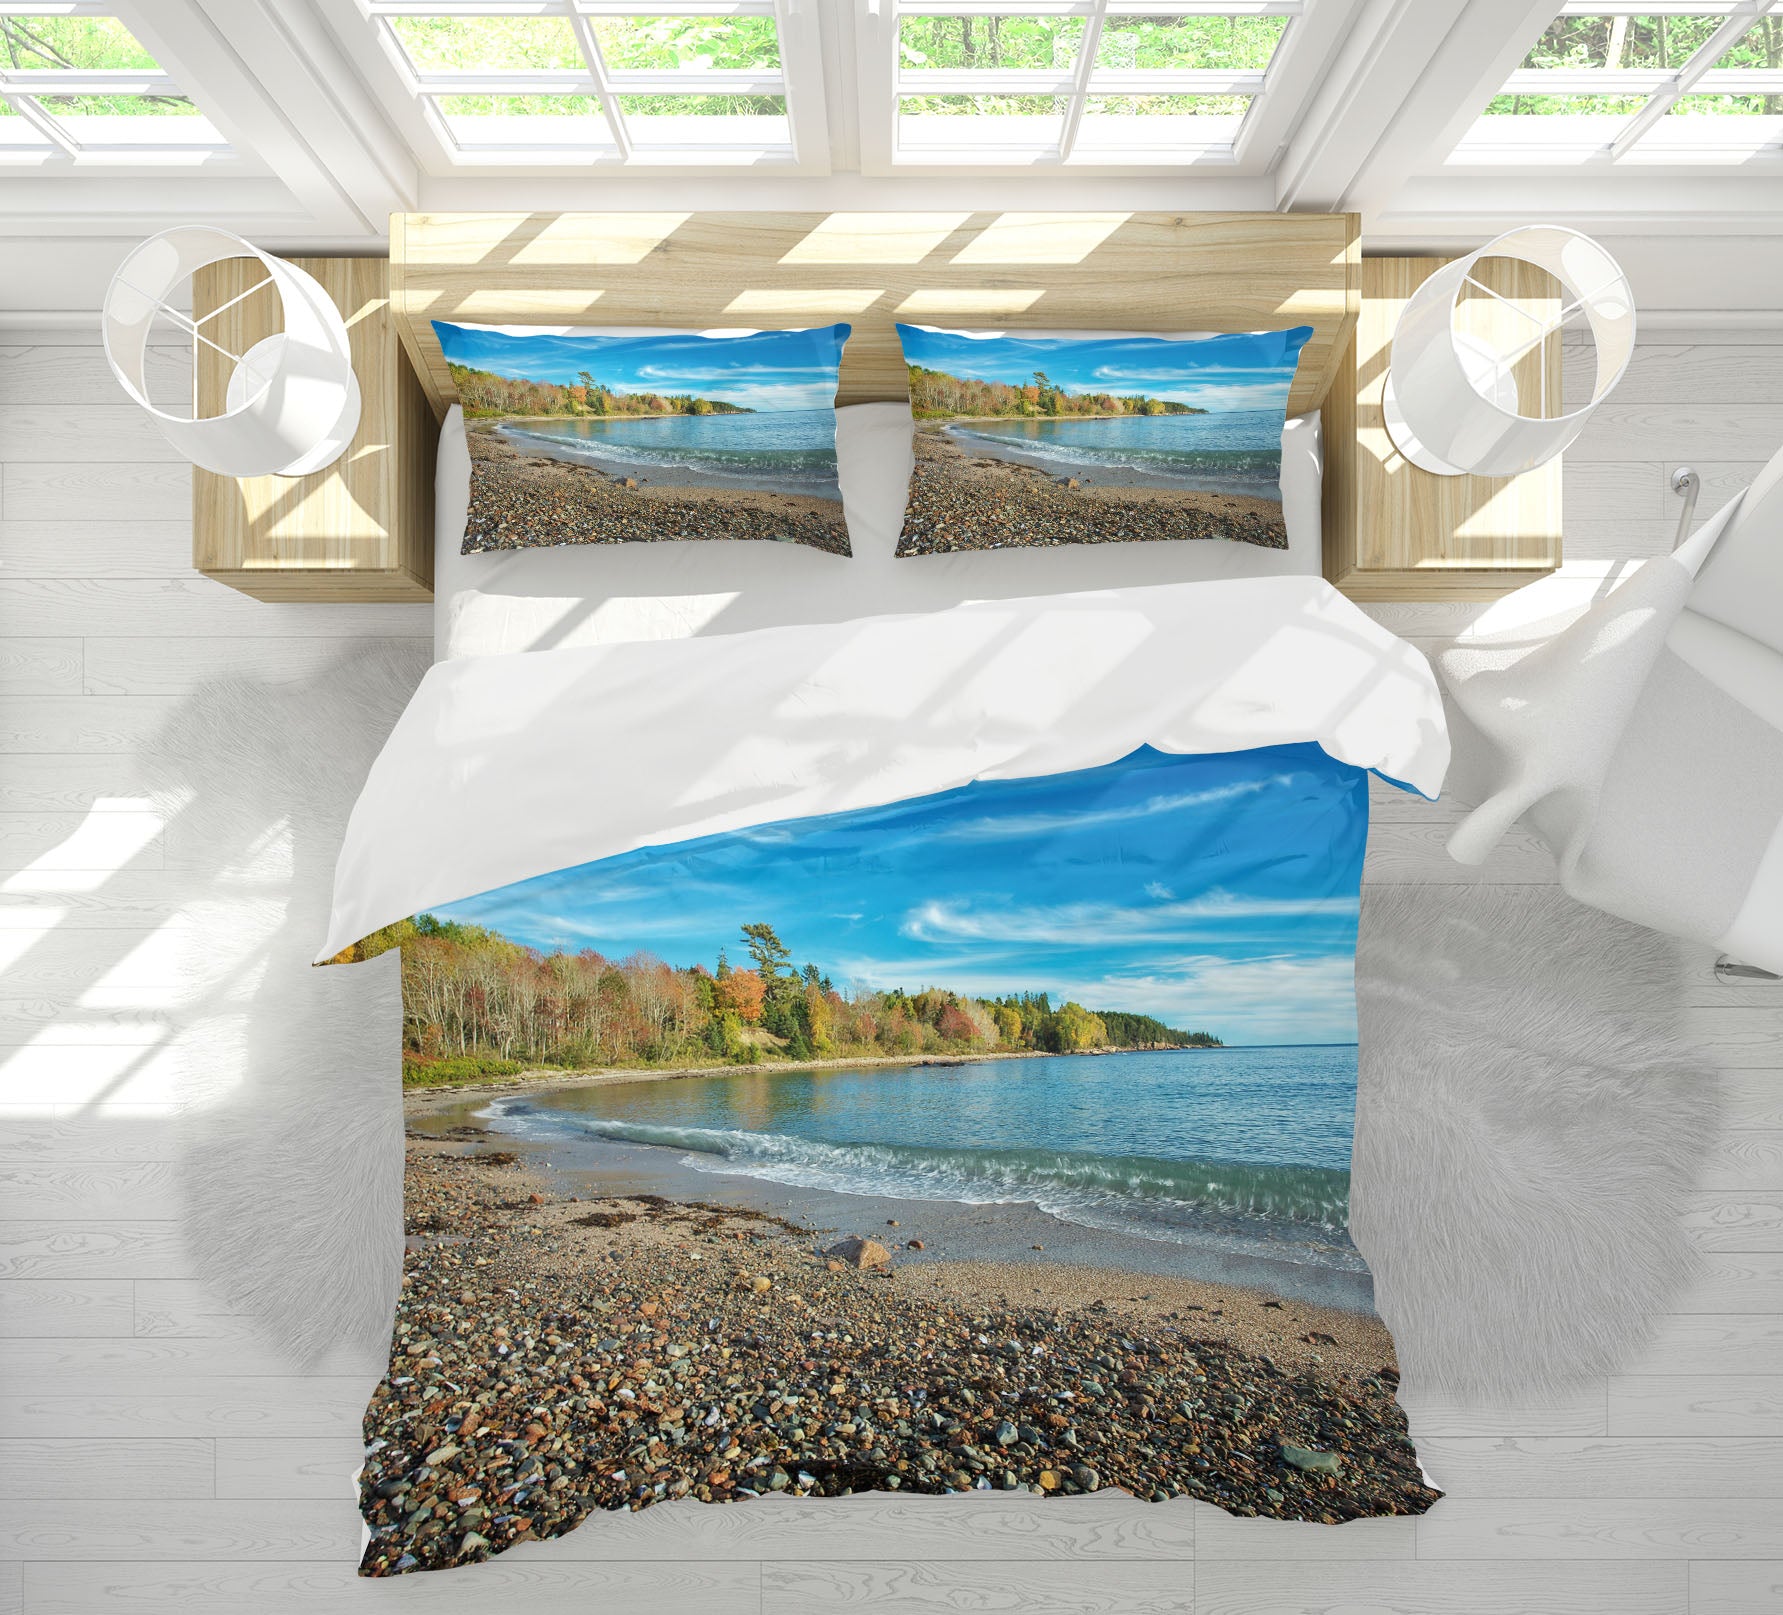 3D Coastal Maine 62008 Kathy Barefield Bedding Bed Pillowcases Quilt